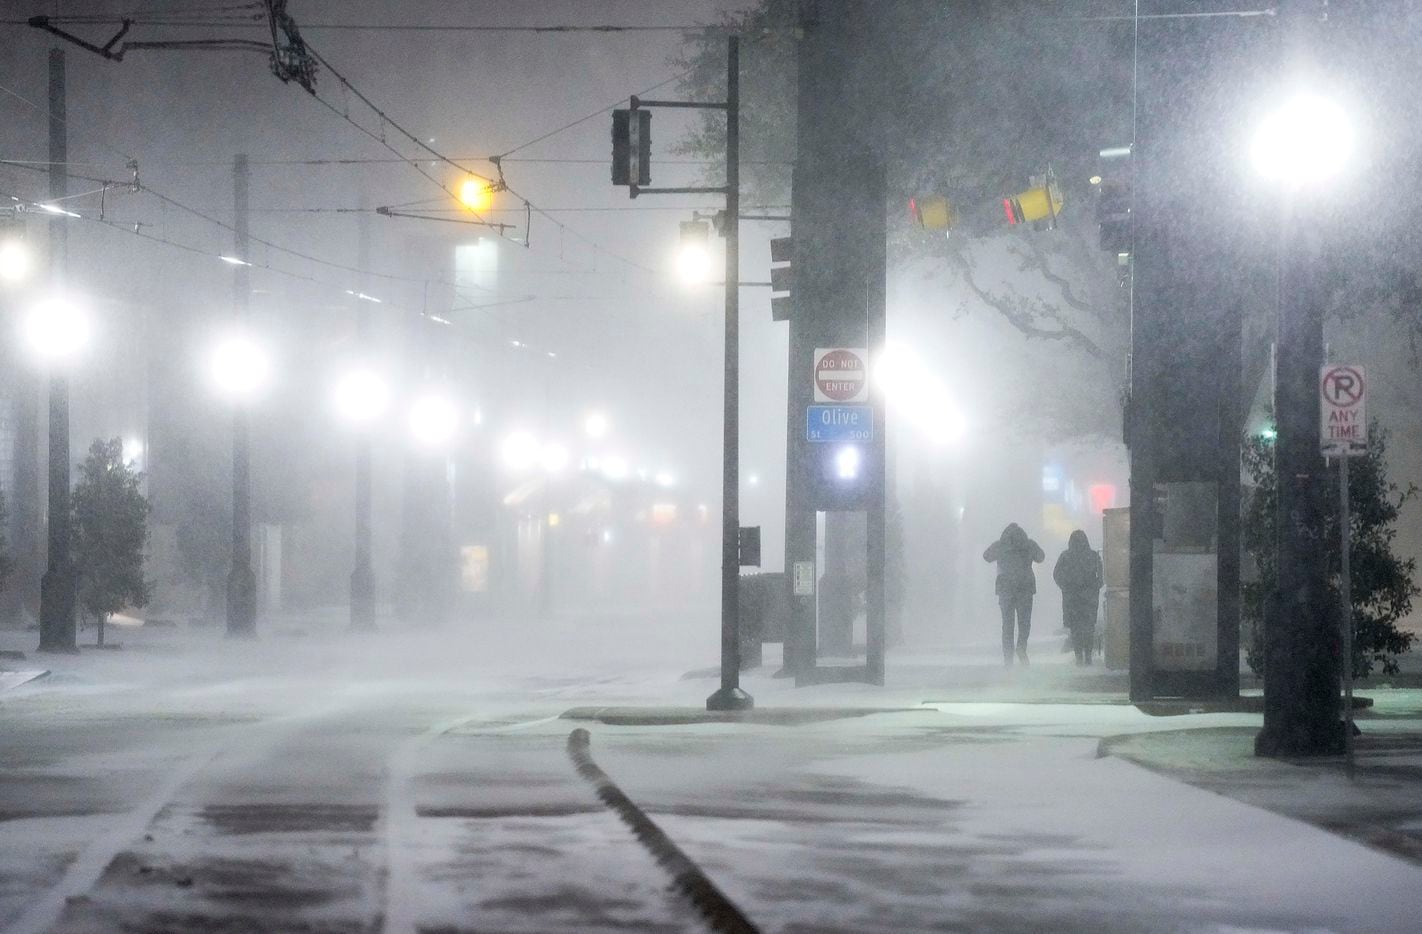 Blowing snow obscures people walking along Bryan Streen near the Pearl/Arts District station as a winter storm brings snow and freezing temperatures to North Texas on Sunday, Feb. 14, 2021, in Dallas.